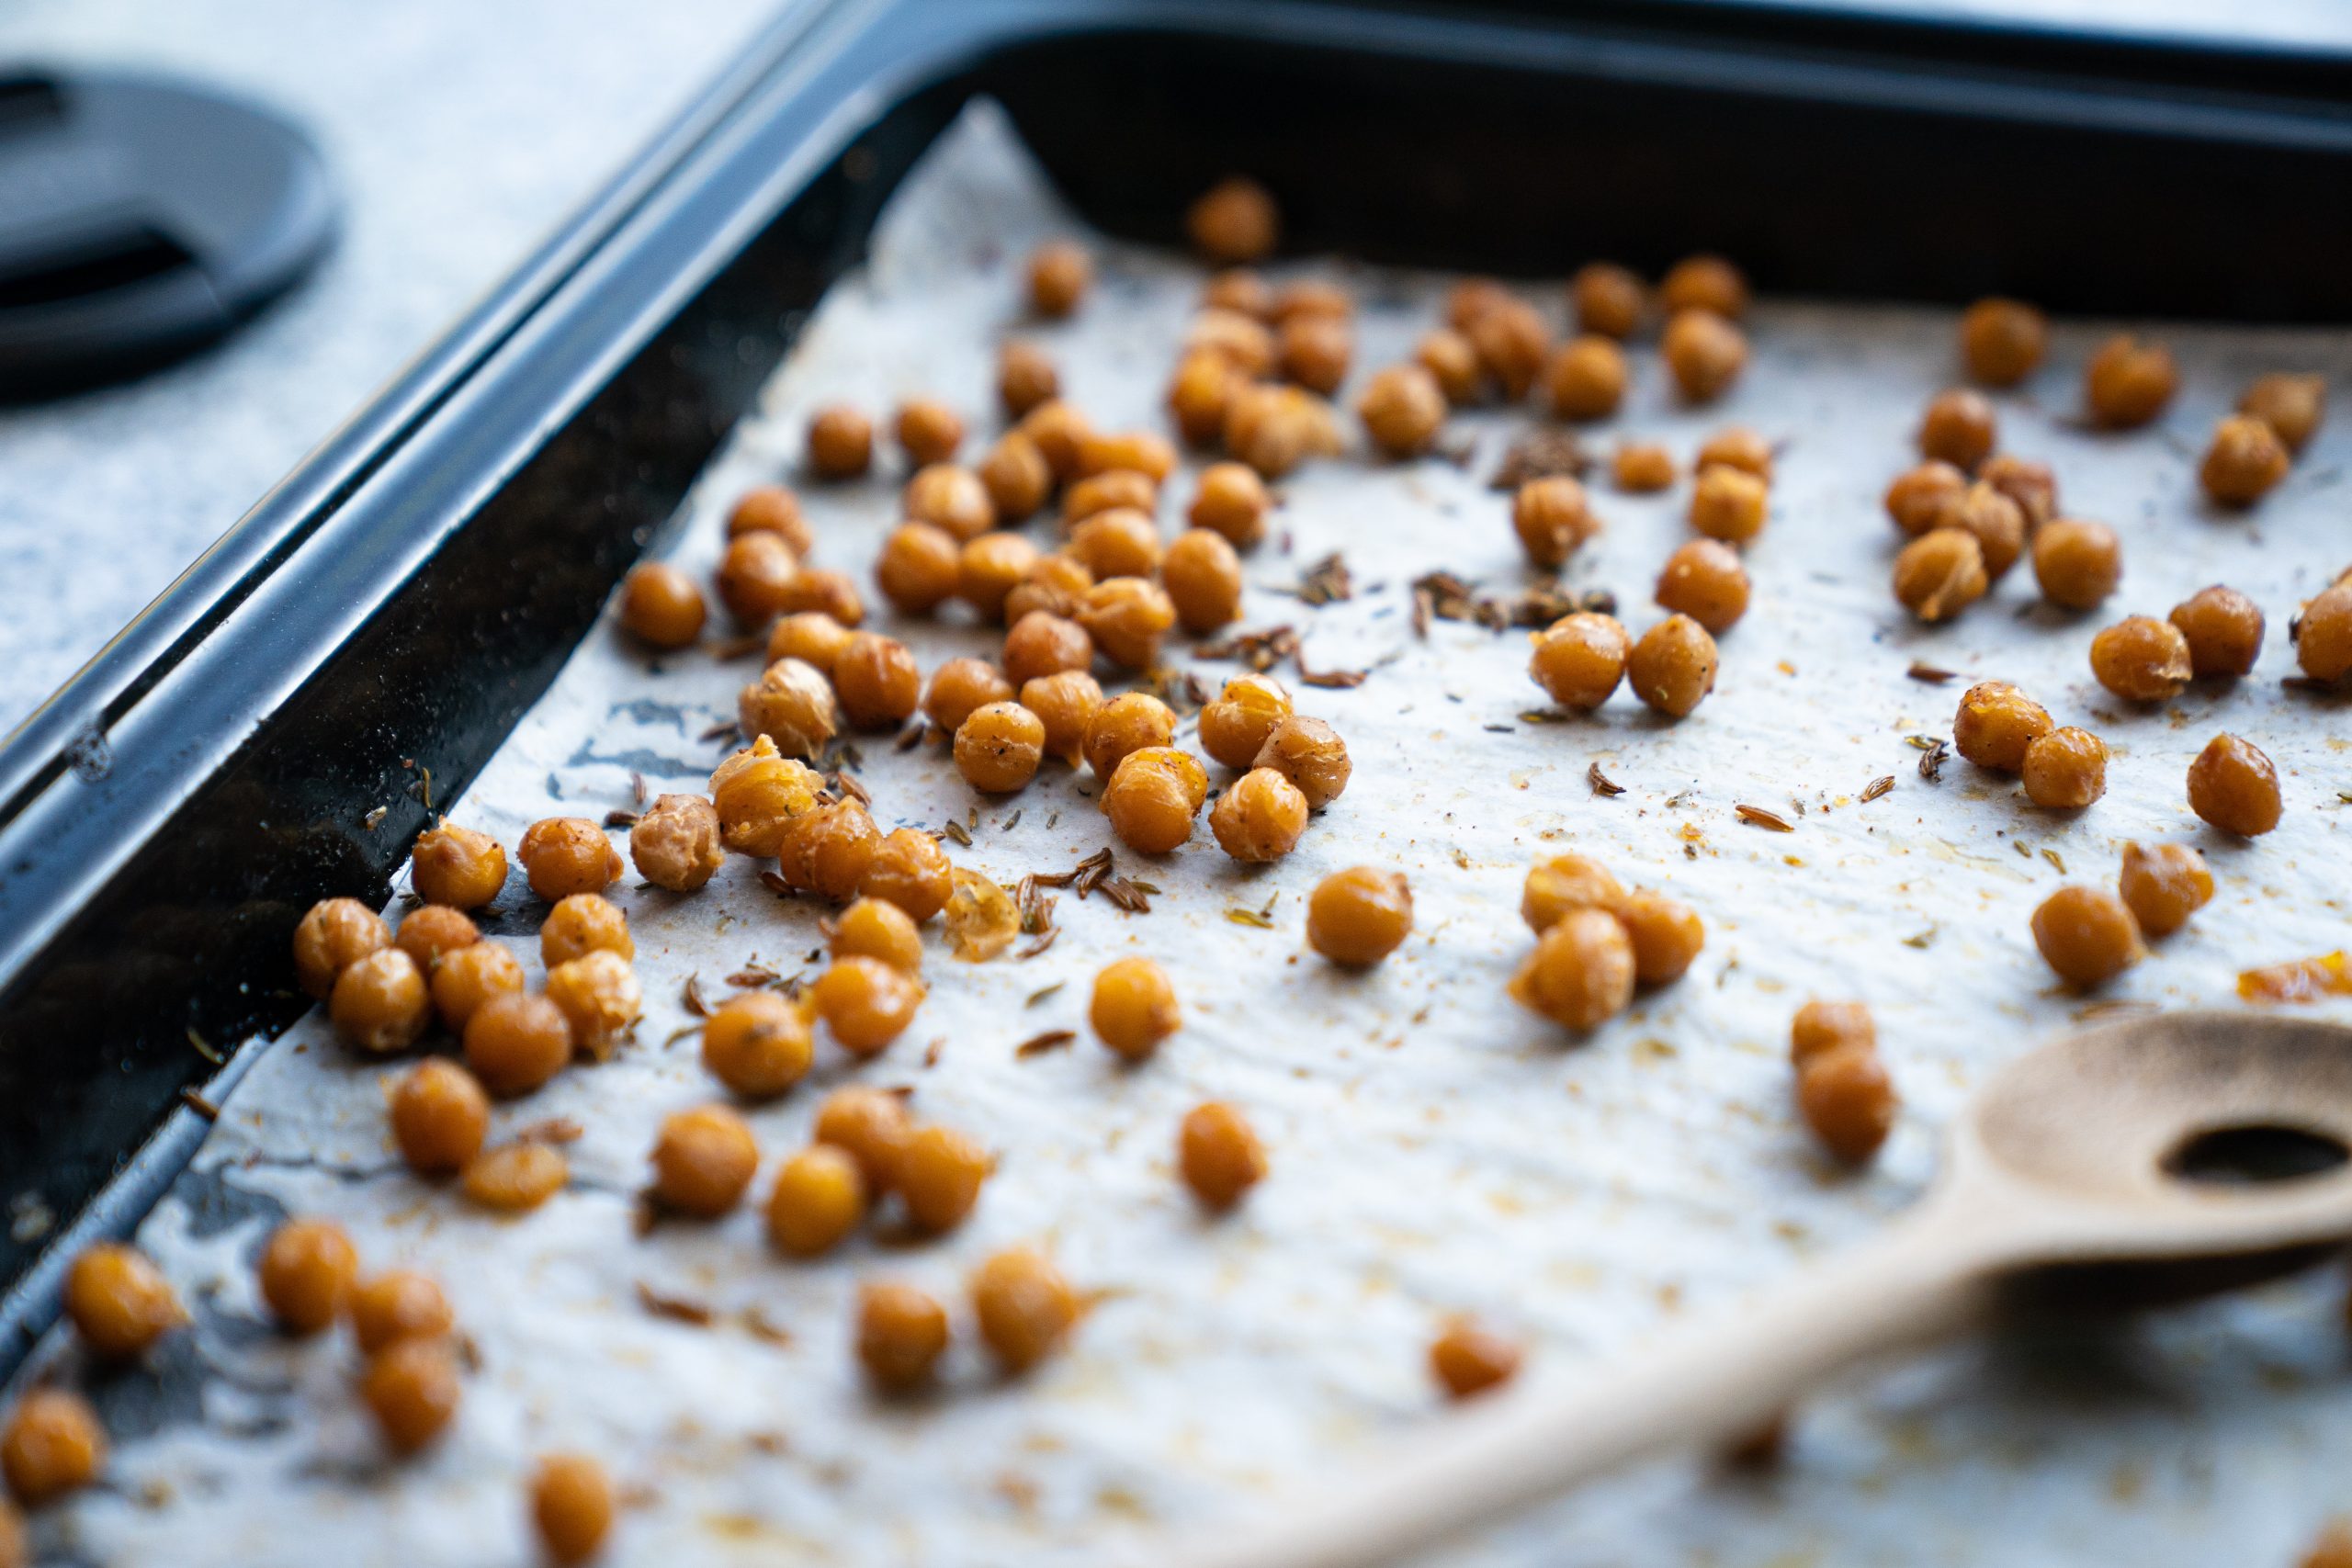 Chickpeas - a great source of plant-based protein